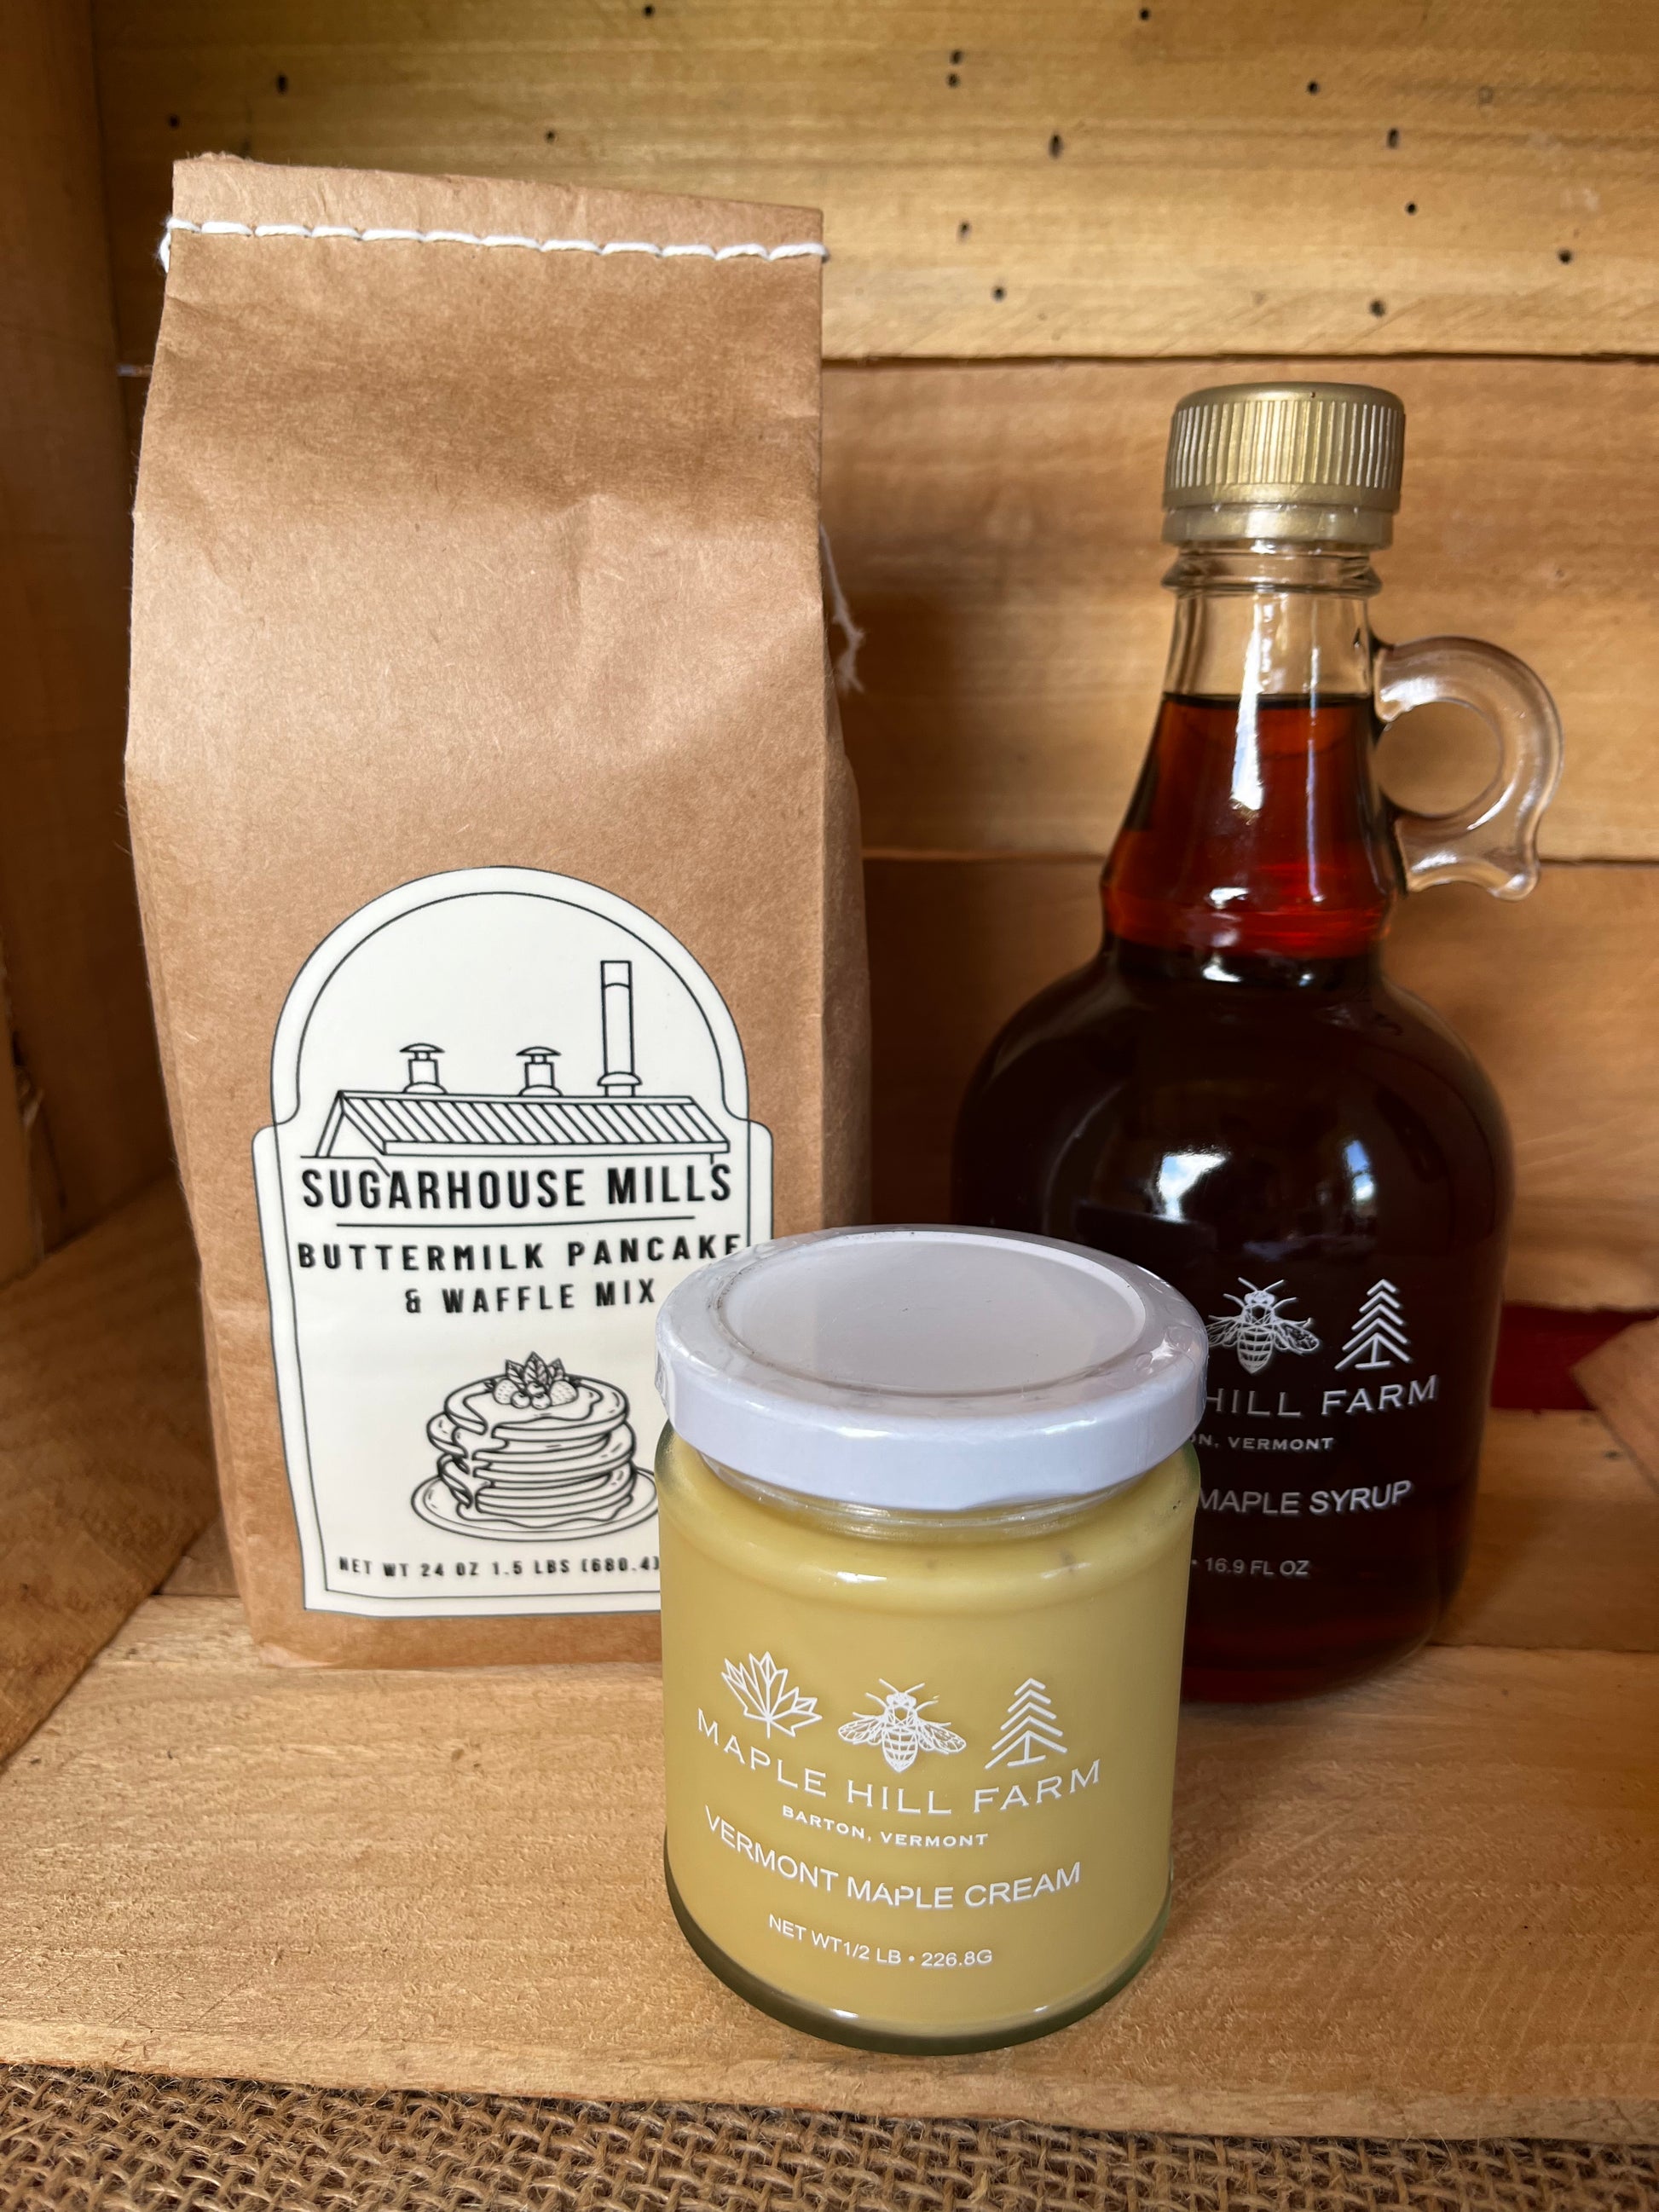 Pure Vermont Maple Syrup Maple Product Pack Breakfast Maple Hill Farm Barton Vermont